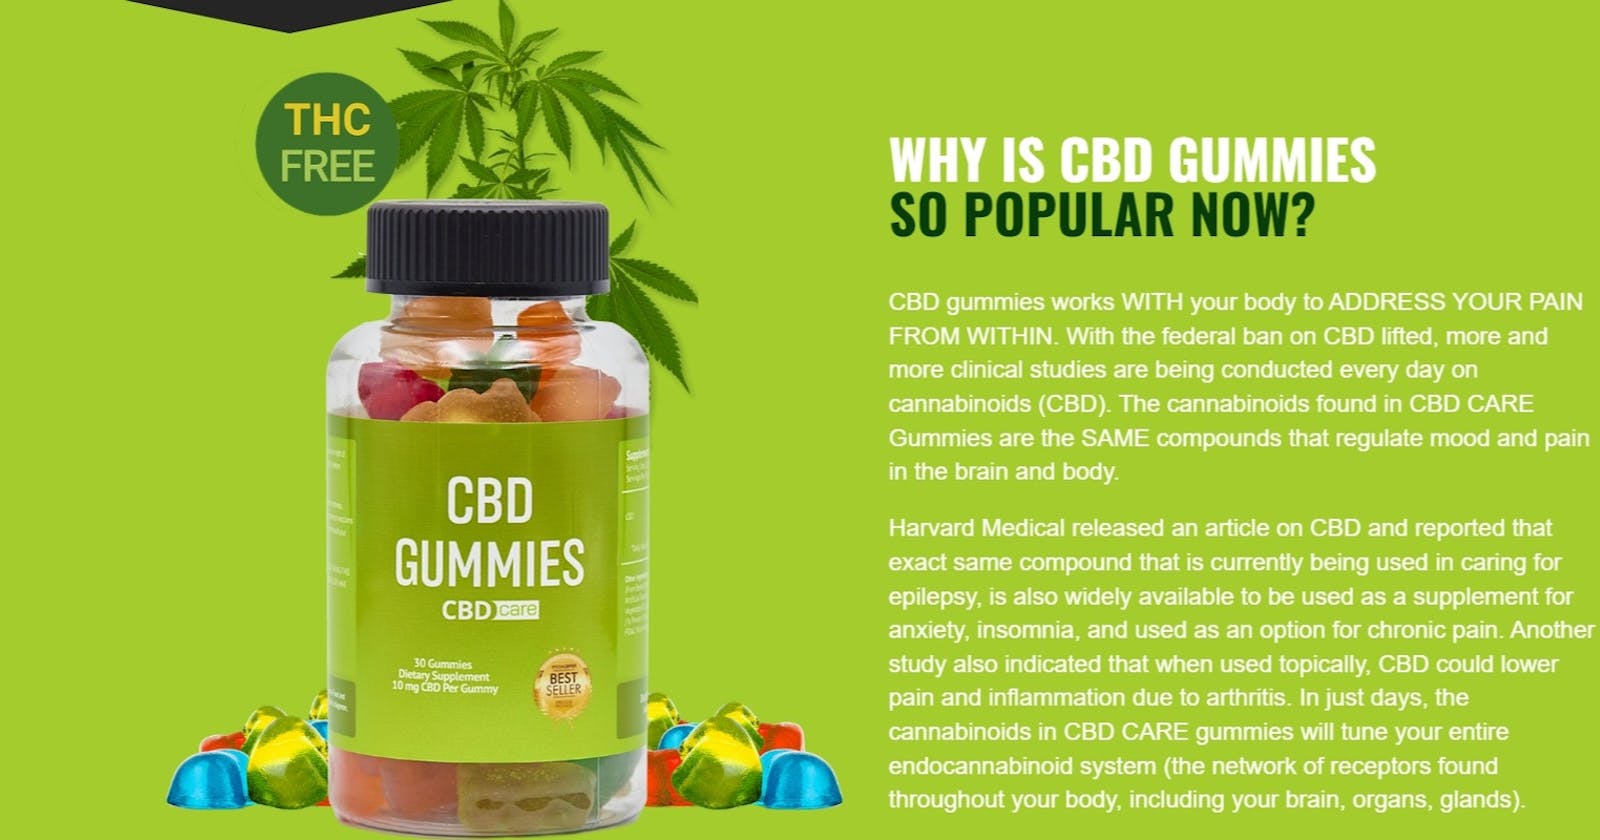 Bloom CBD Gummies Reviews (Pro & Cons Exposed) - Don’t Buy Until Reading?